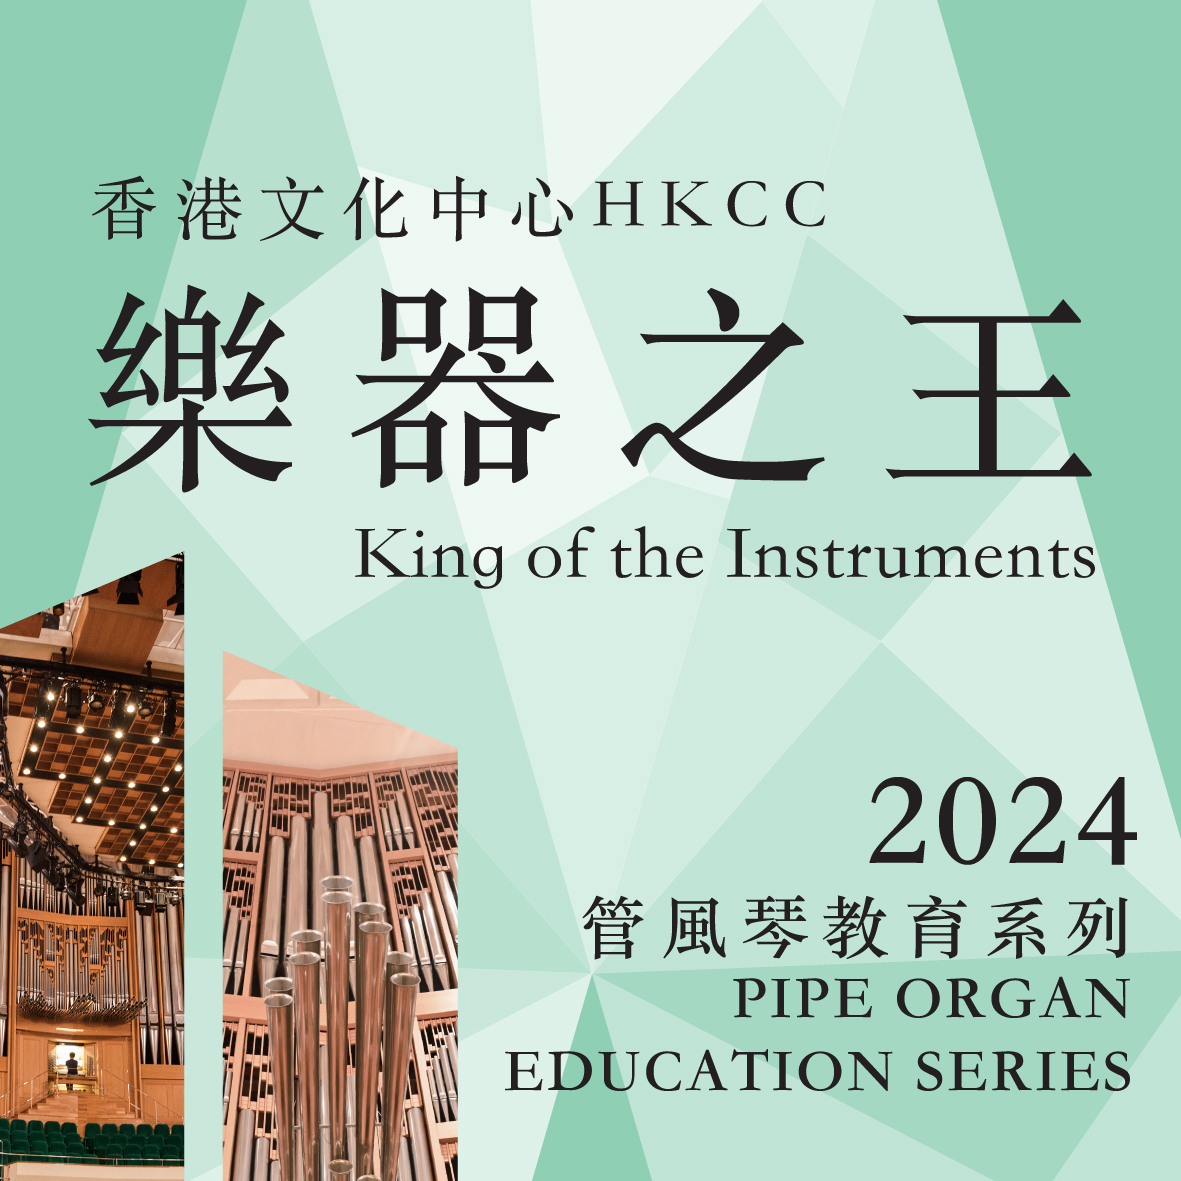 HKCC King of the Instruments Pipe Organ Education Series 2024